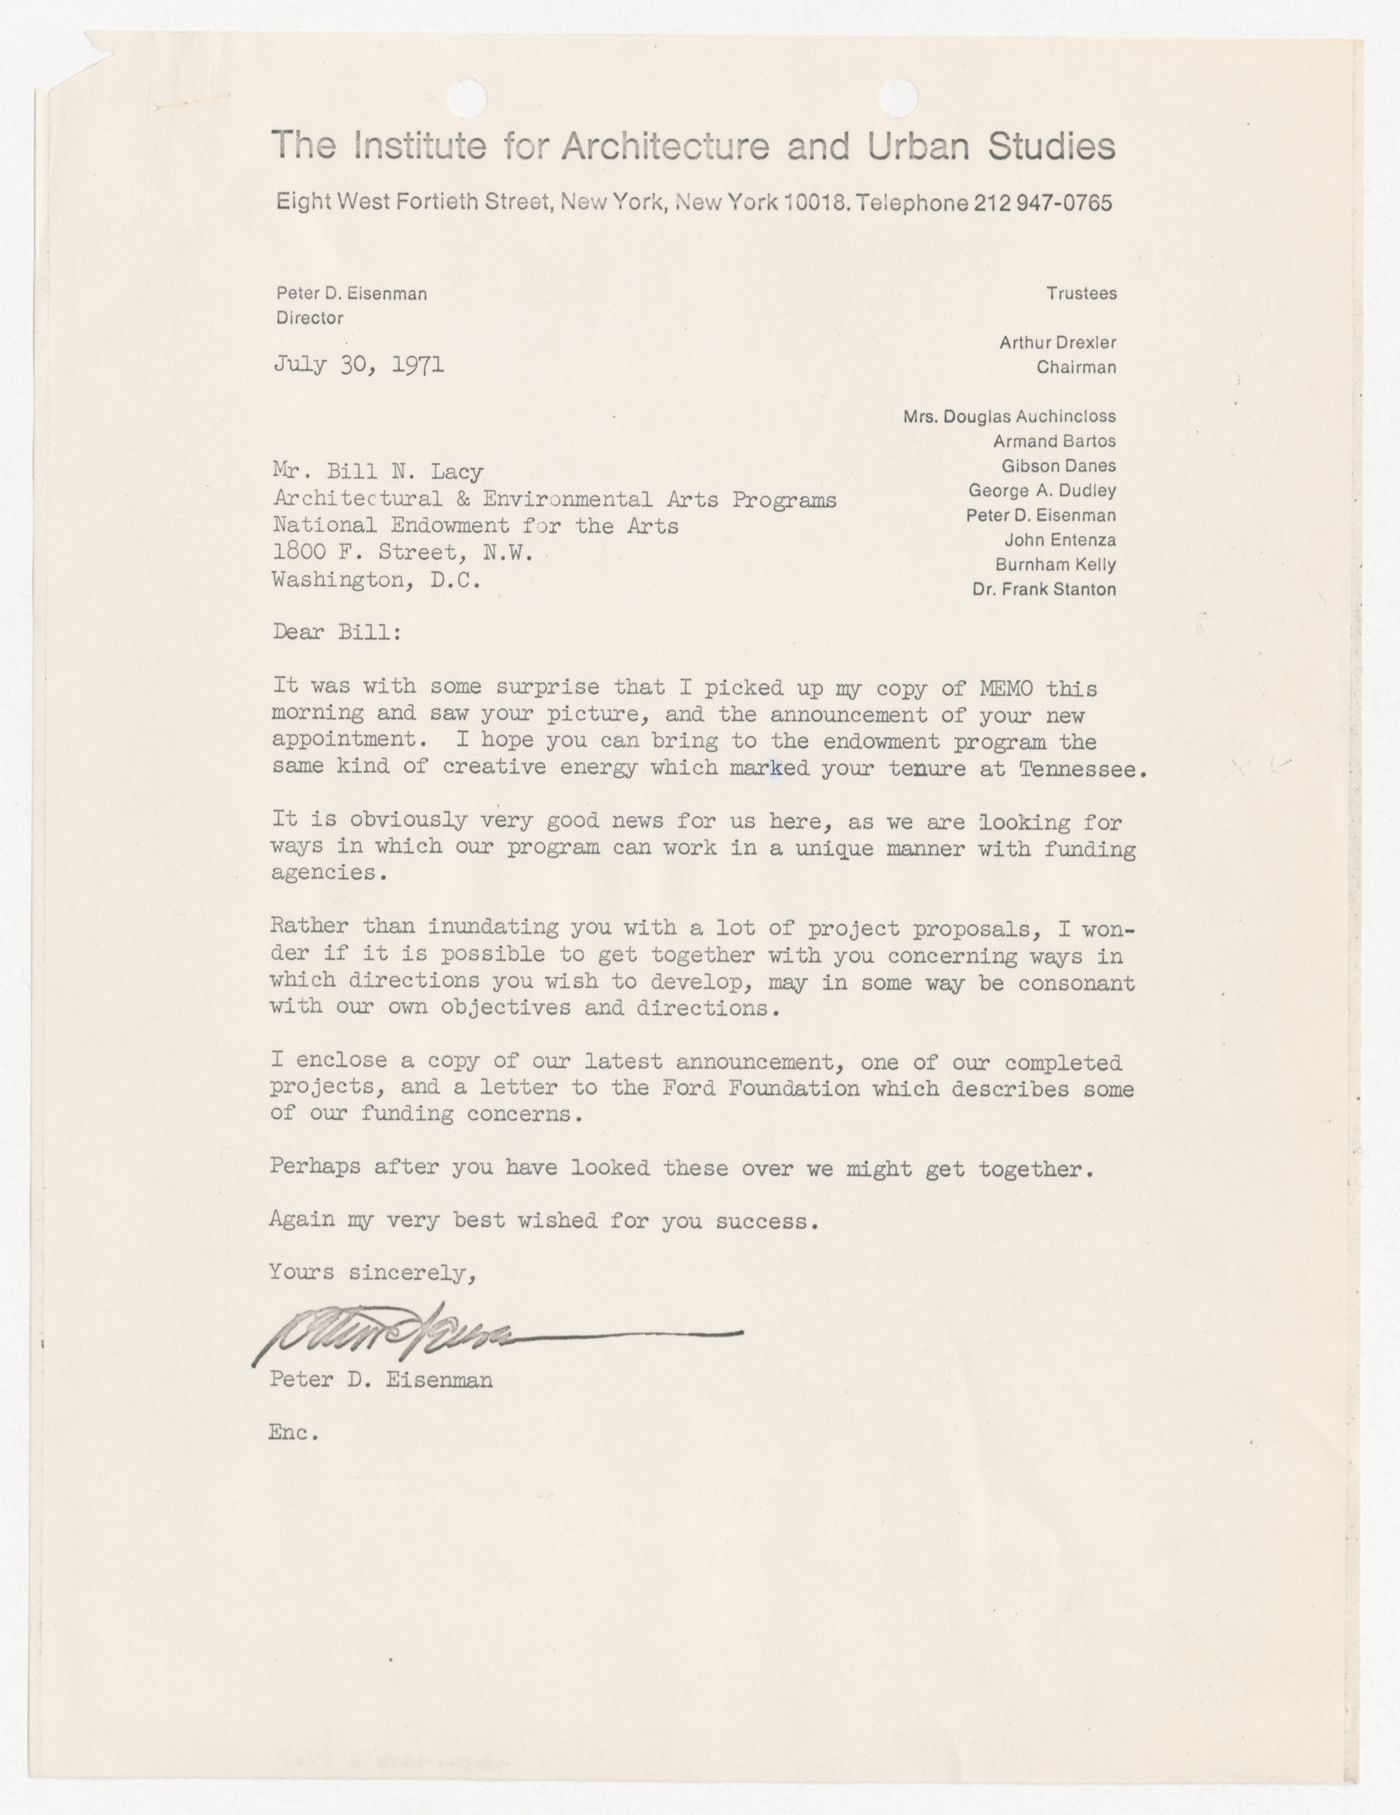 Letter from Peter D. Eisenman to Bill N. Lacy with attached IAUS announcement of July 1971